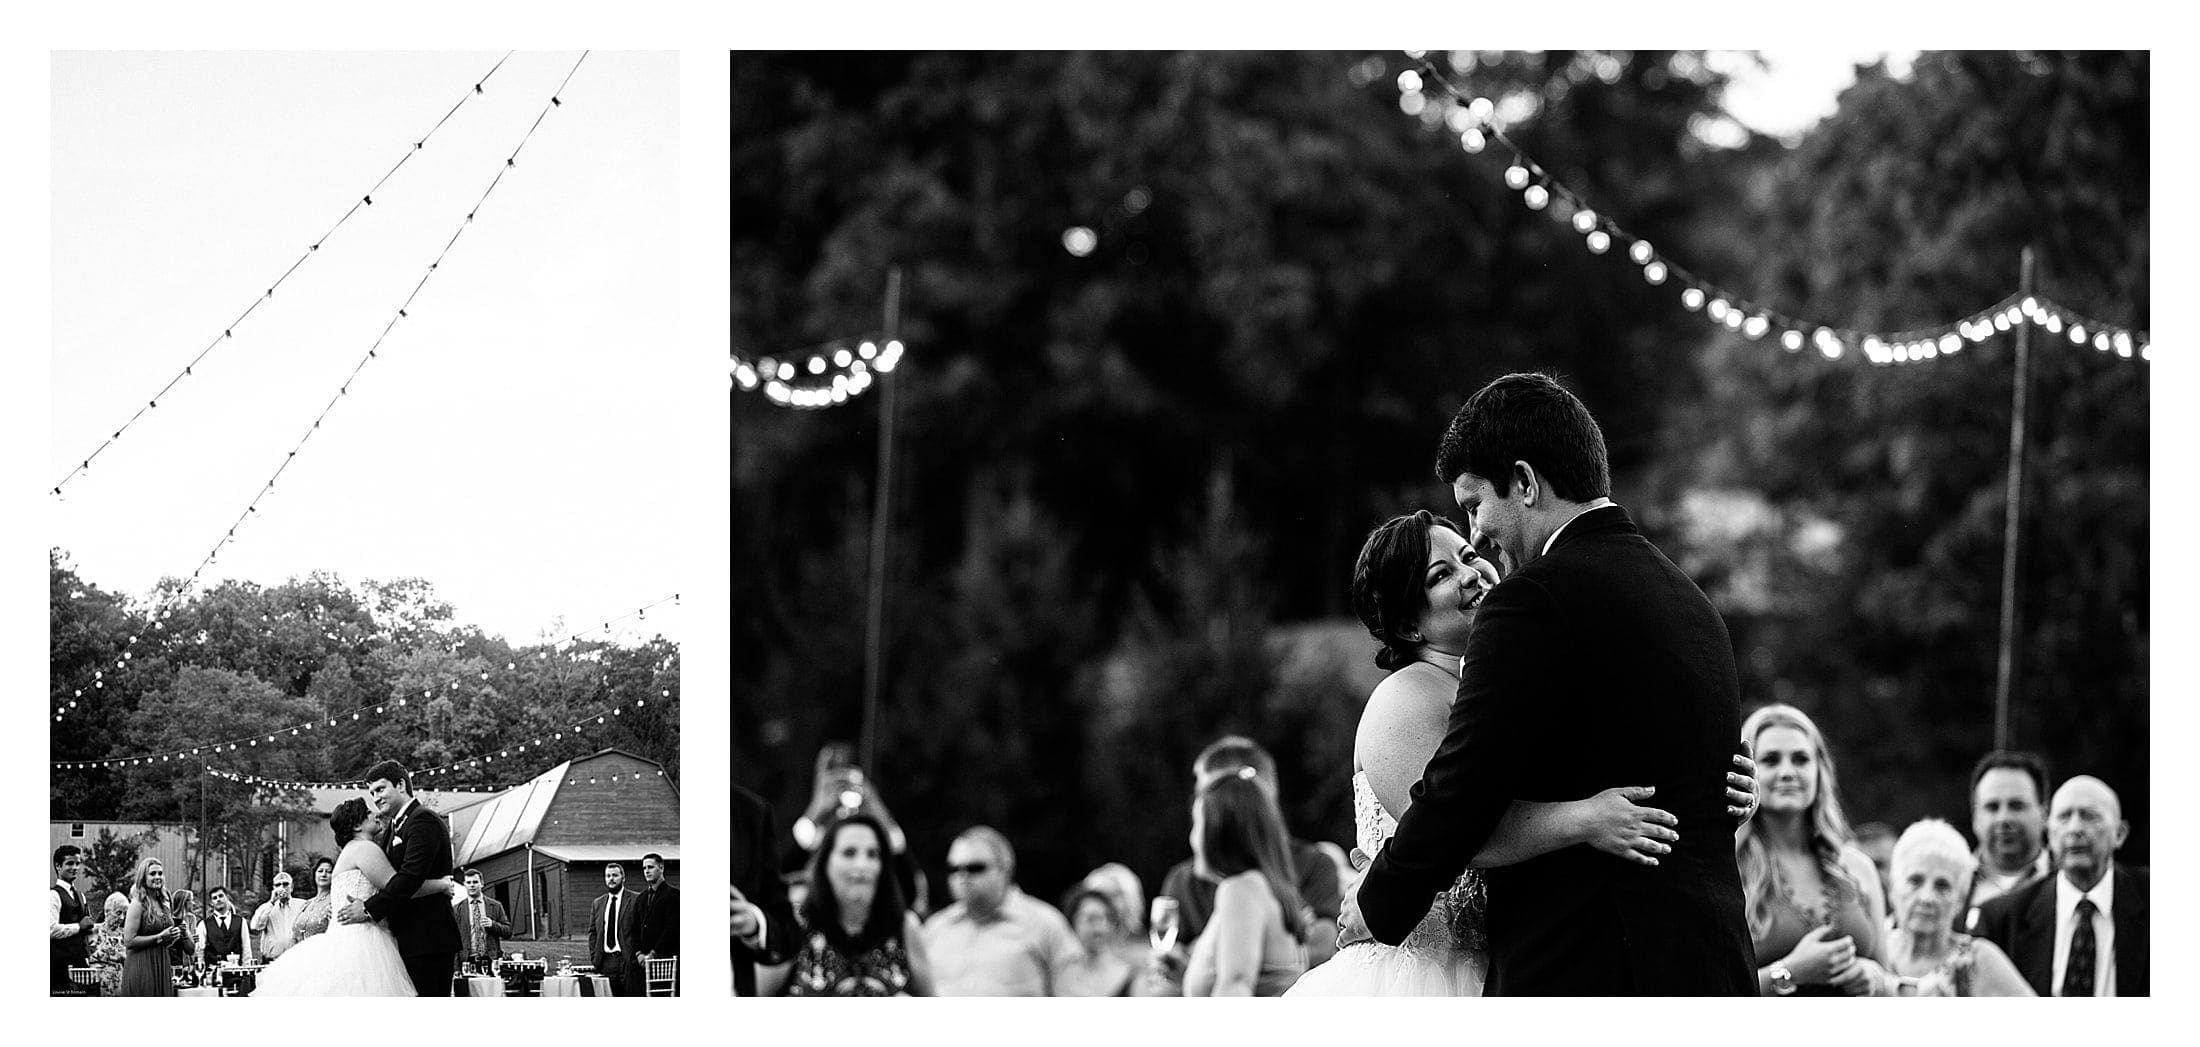 Bride and Groom's first dance under cafe lights at outdoor wedding reception in Asheville, NC